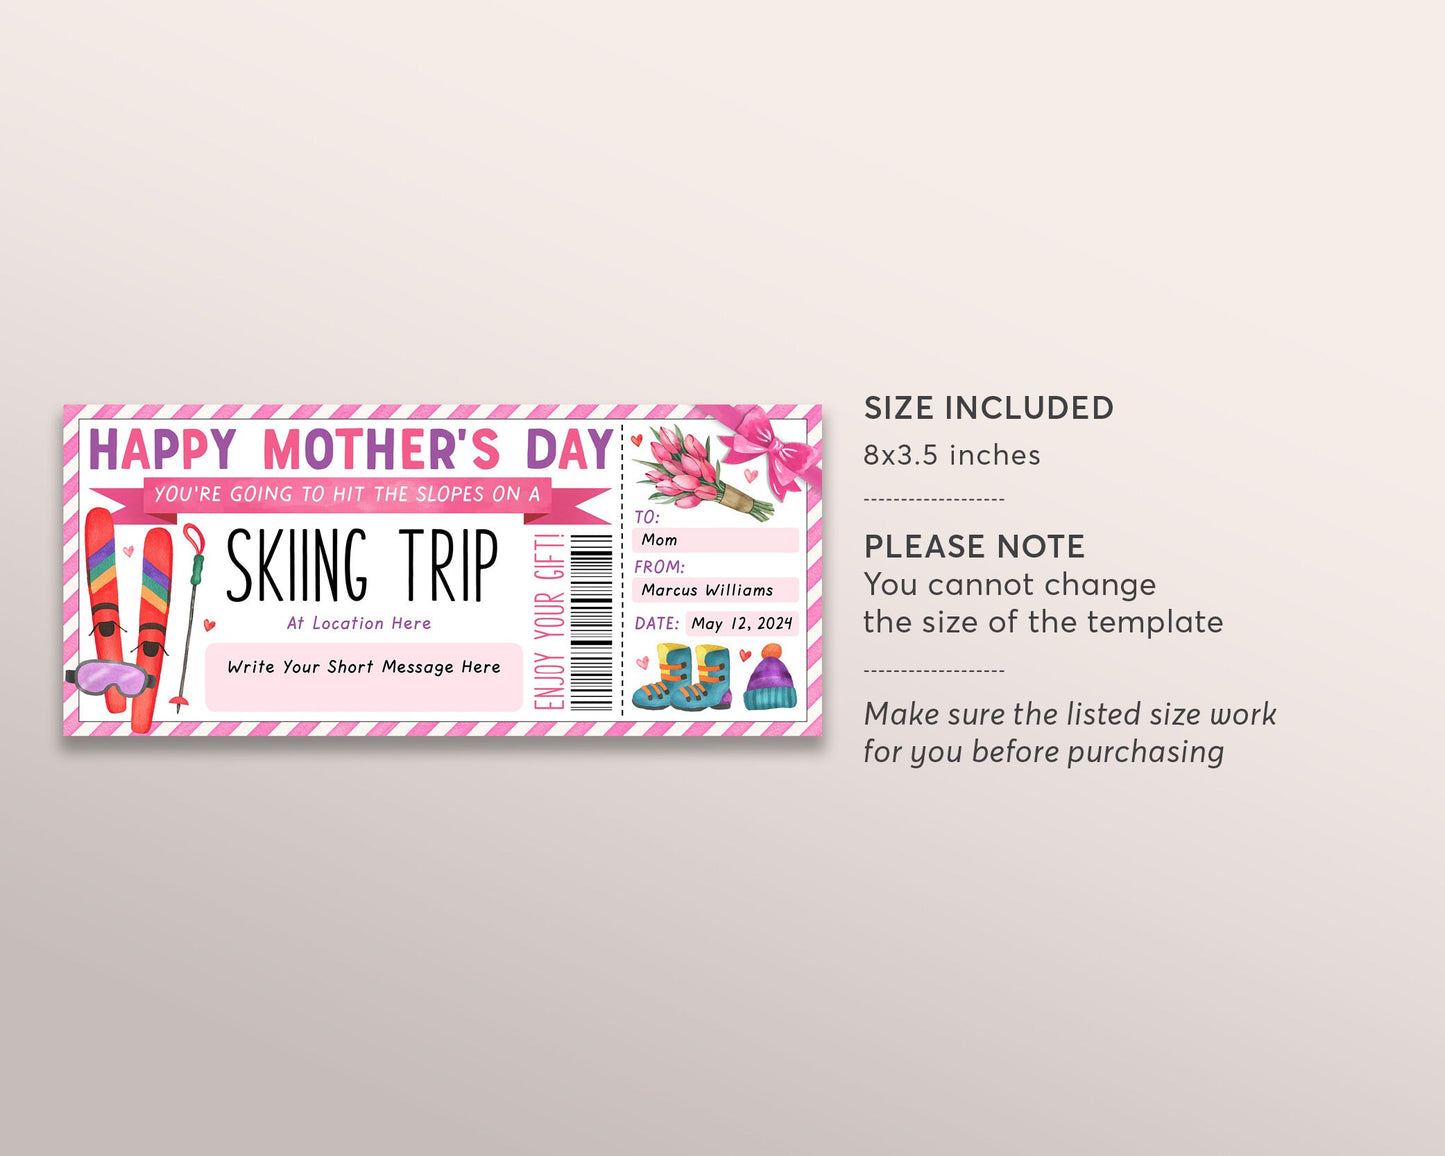 Mothers Day Skiing Trip Gift Certificate Editable Template, Surprise Holiday Ski Pass Vacation Gift Voucher For Mom, Skiing Lessons Training